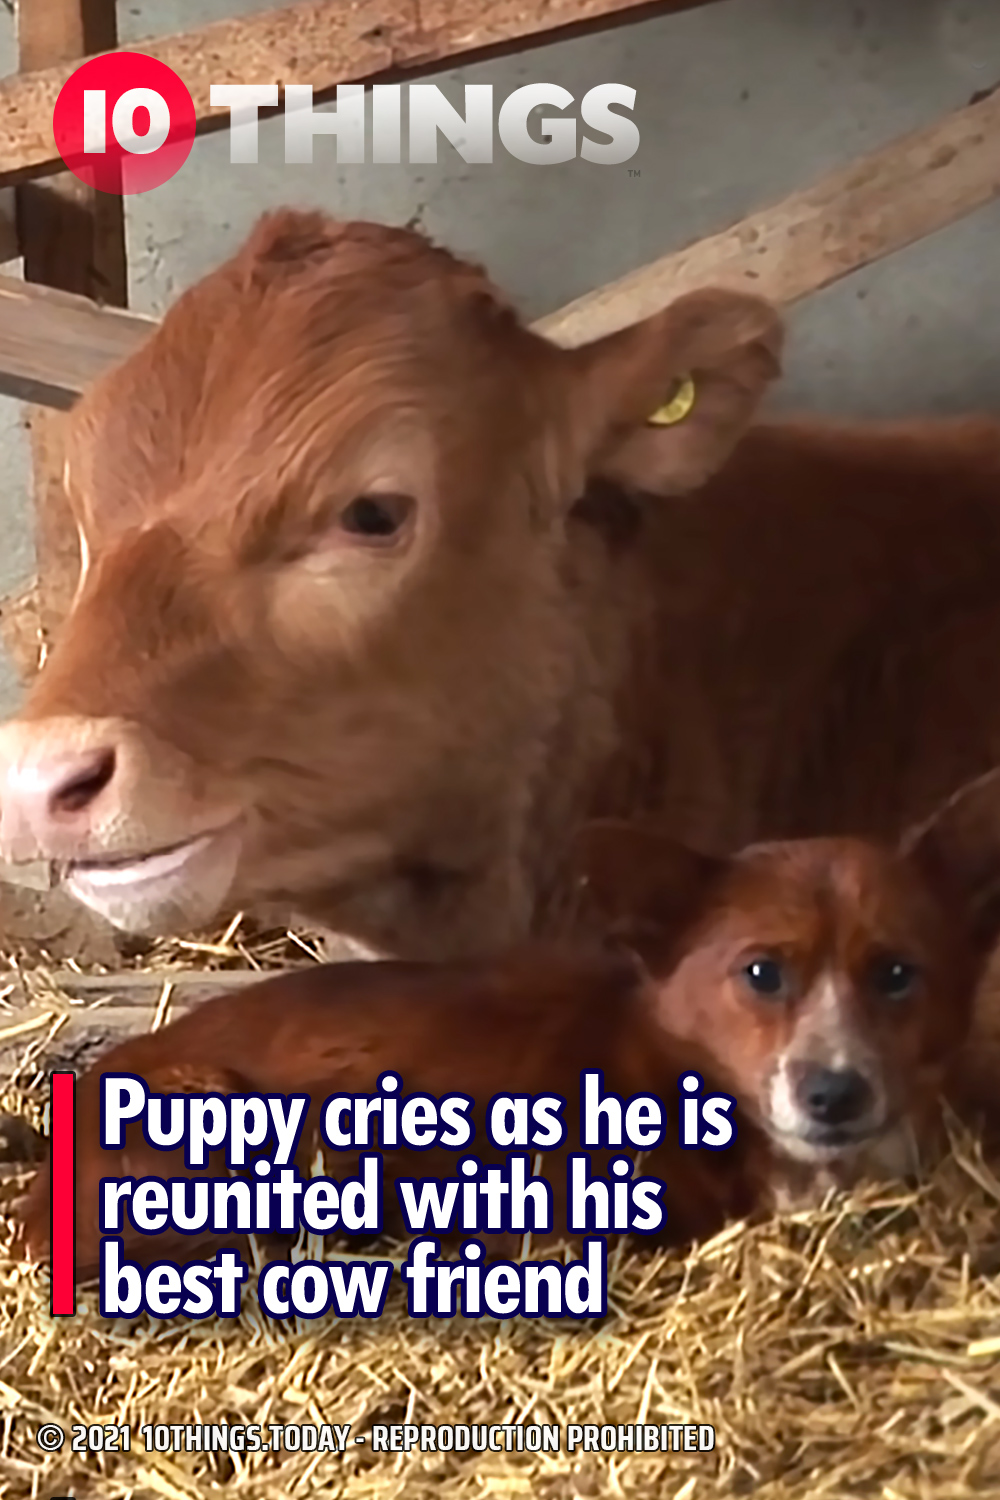 Puppy cries as he is reunited with his best cow friend